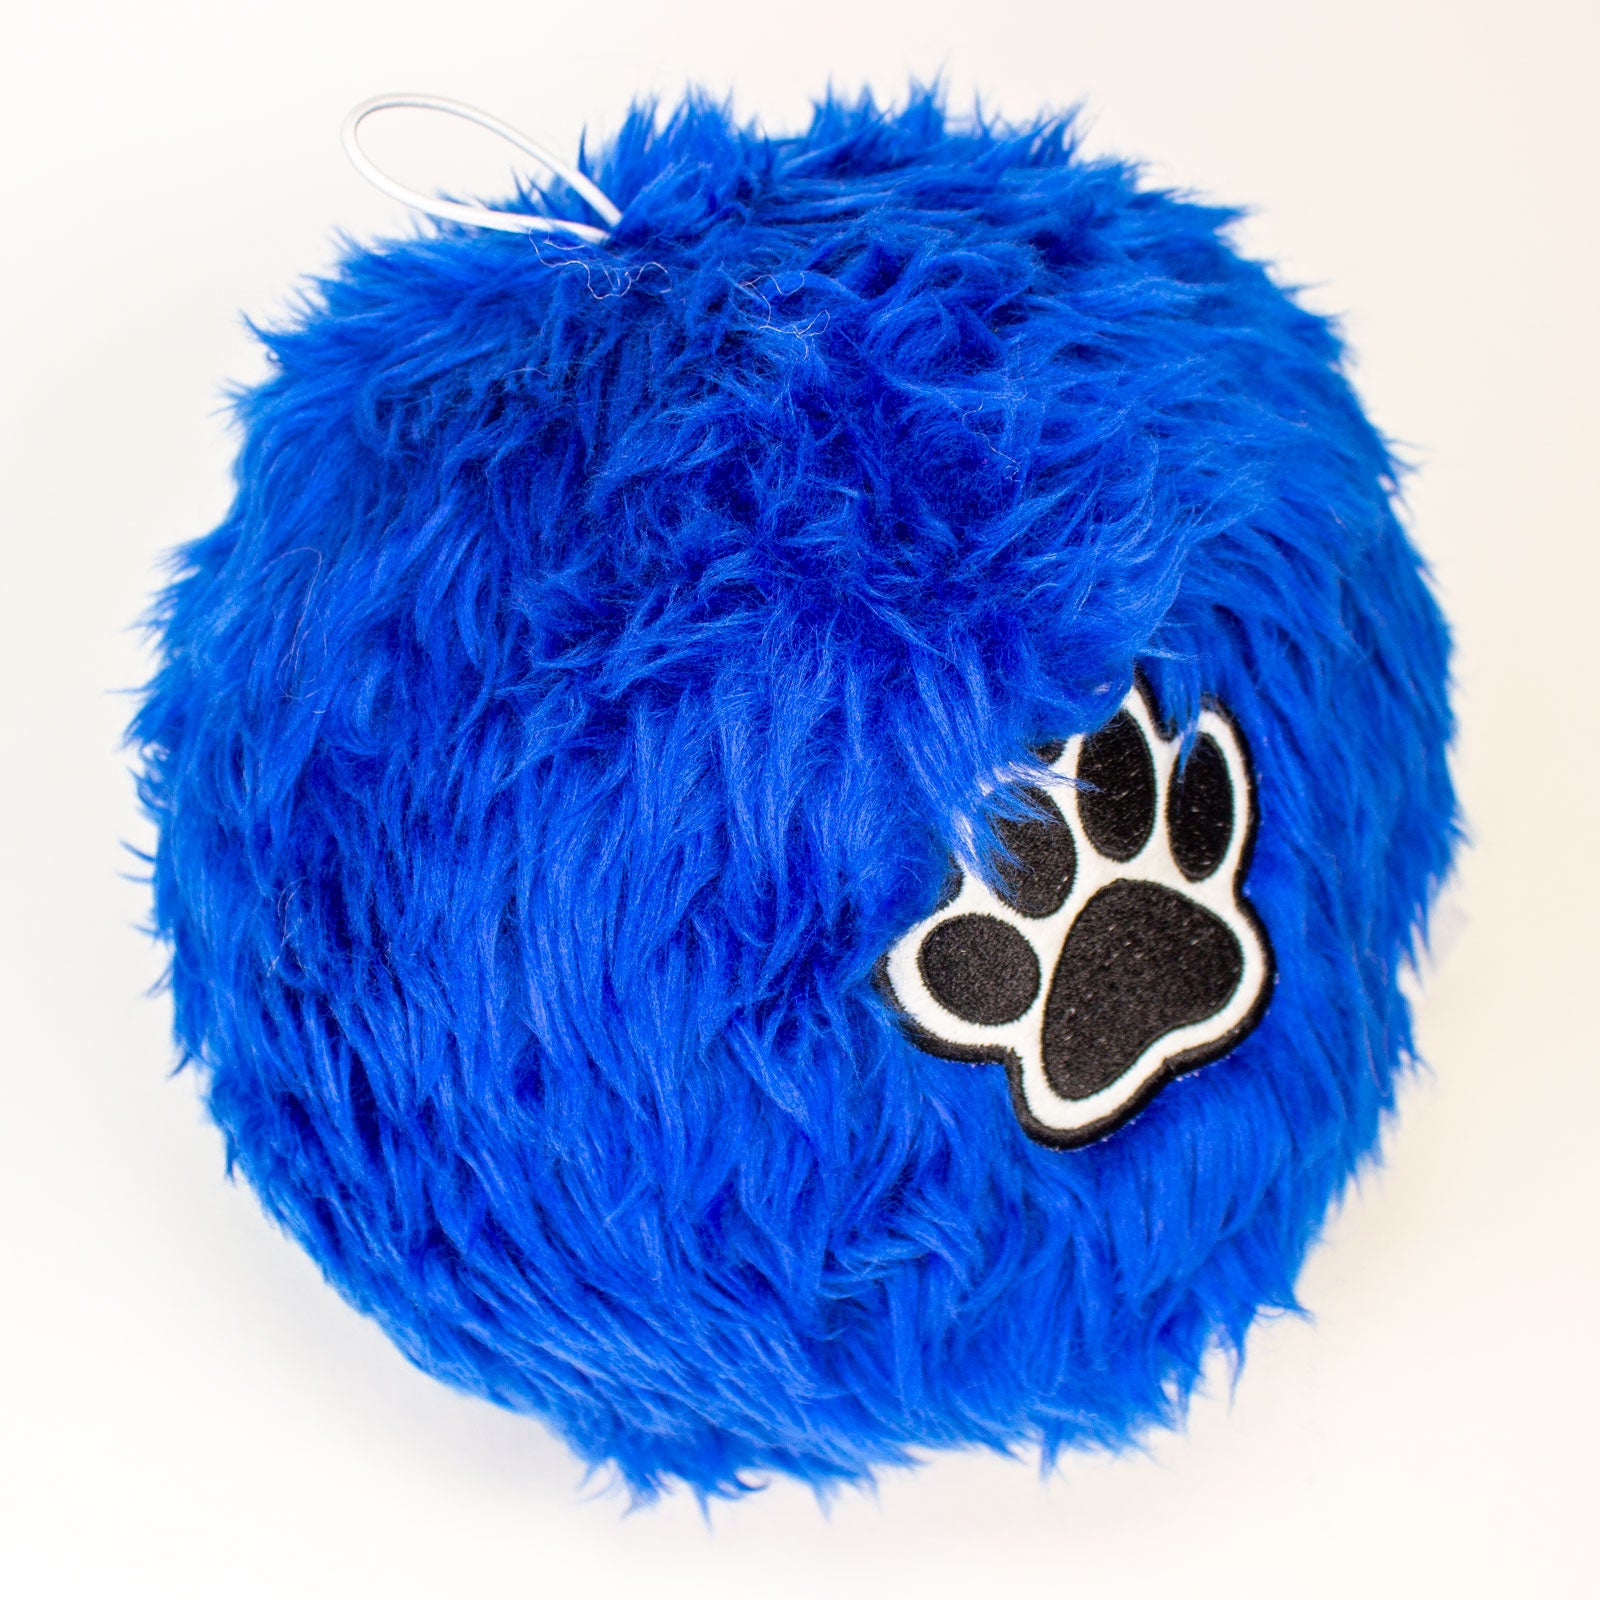 Soft Fluffy Ball For Belgian Malinois Dogs - Large Size